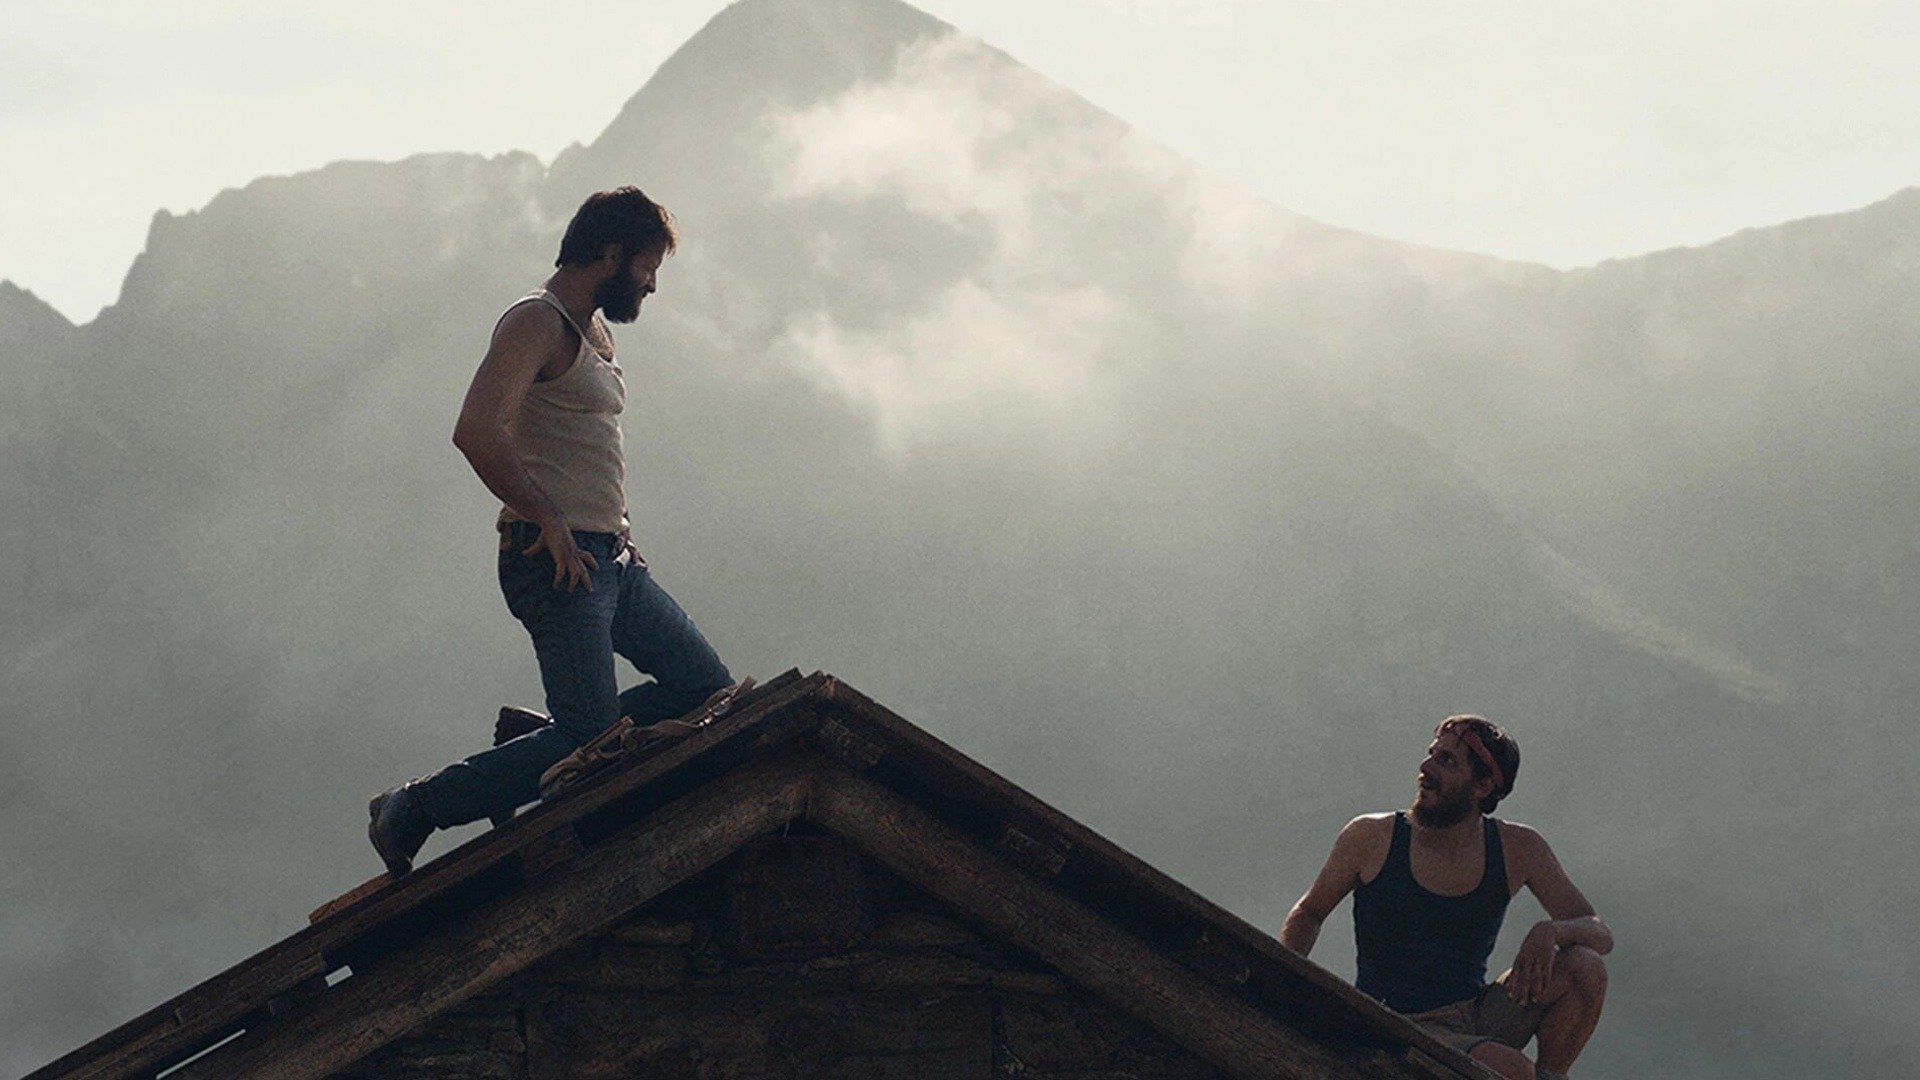 Two man sit on top of a wooden roof, a huge misty mountain dominating the background behind them, 